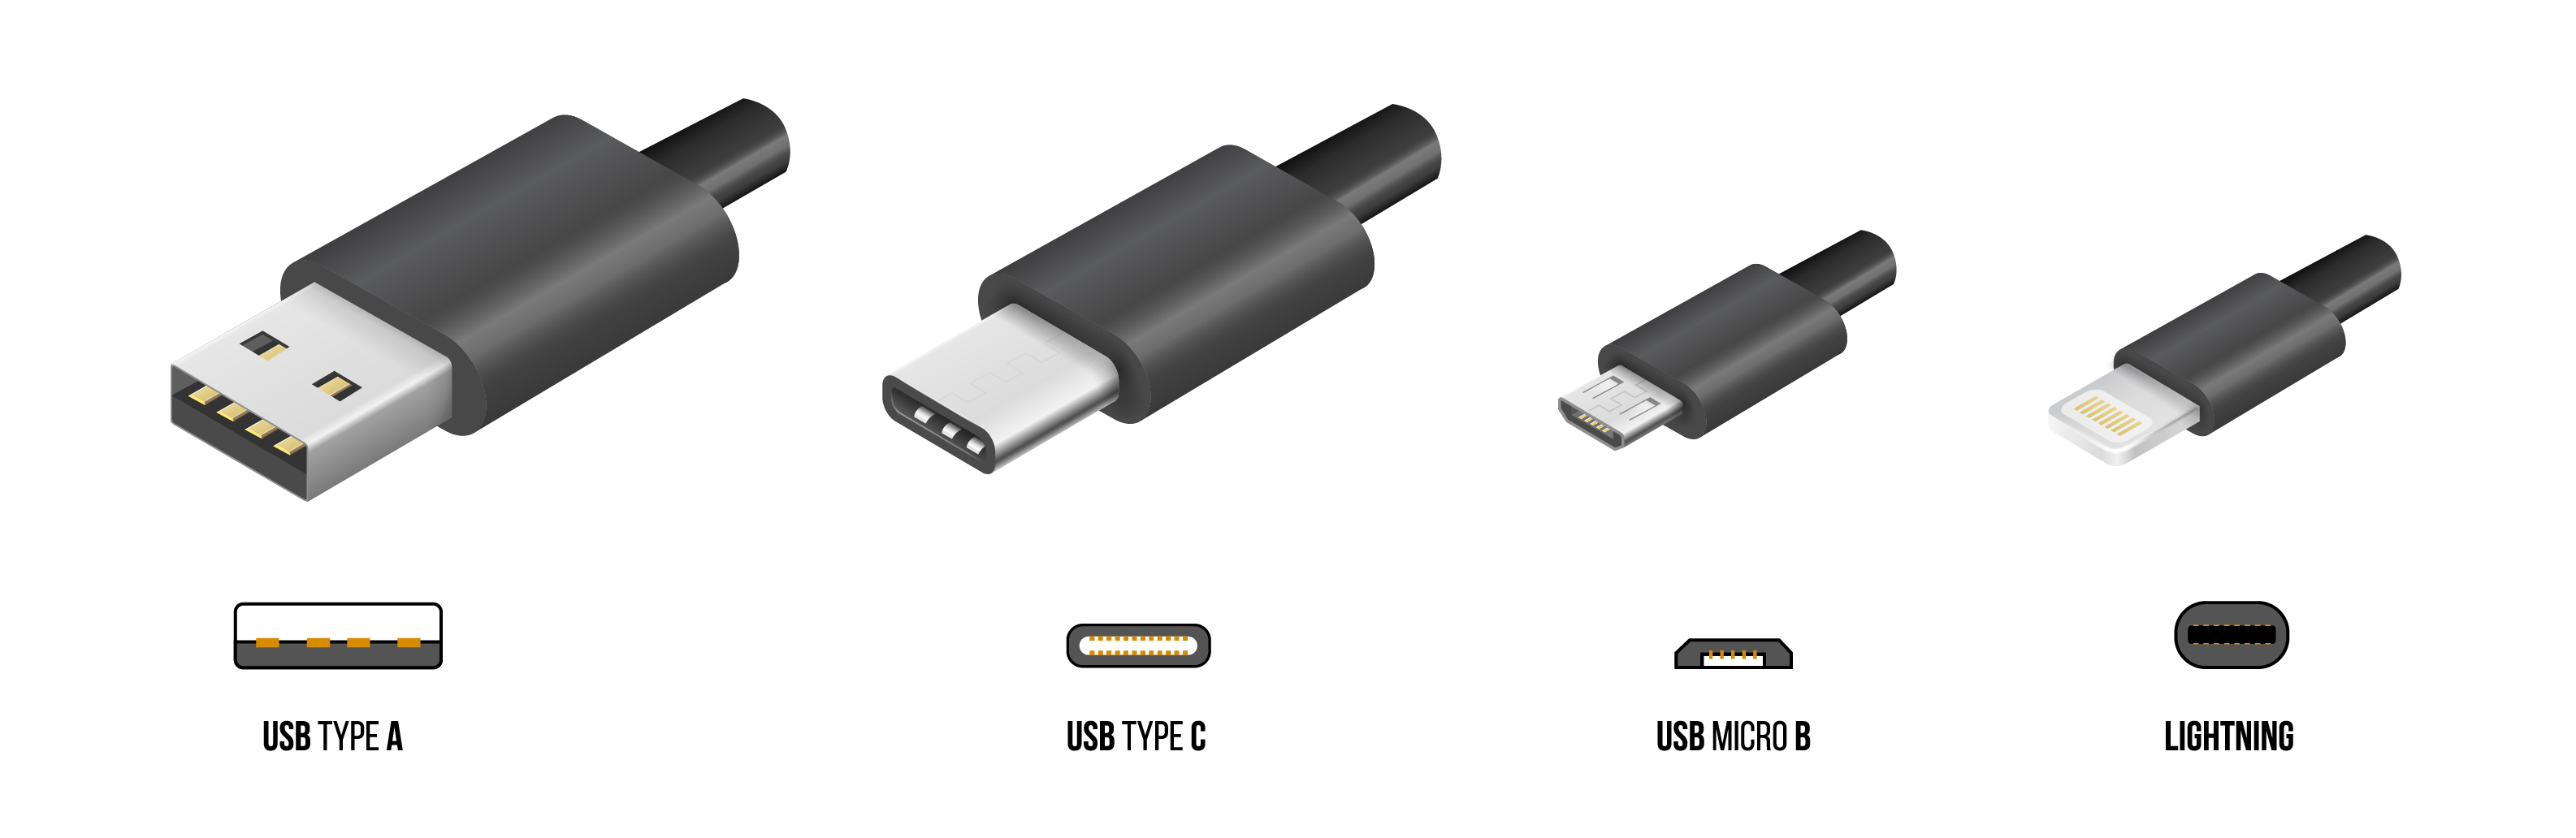 USB-A vs. USB-C: What's the Difference?